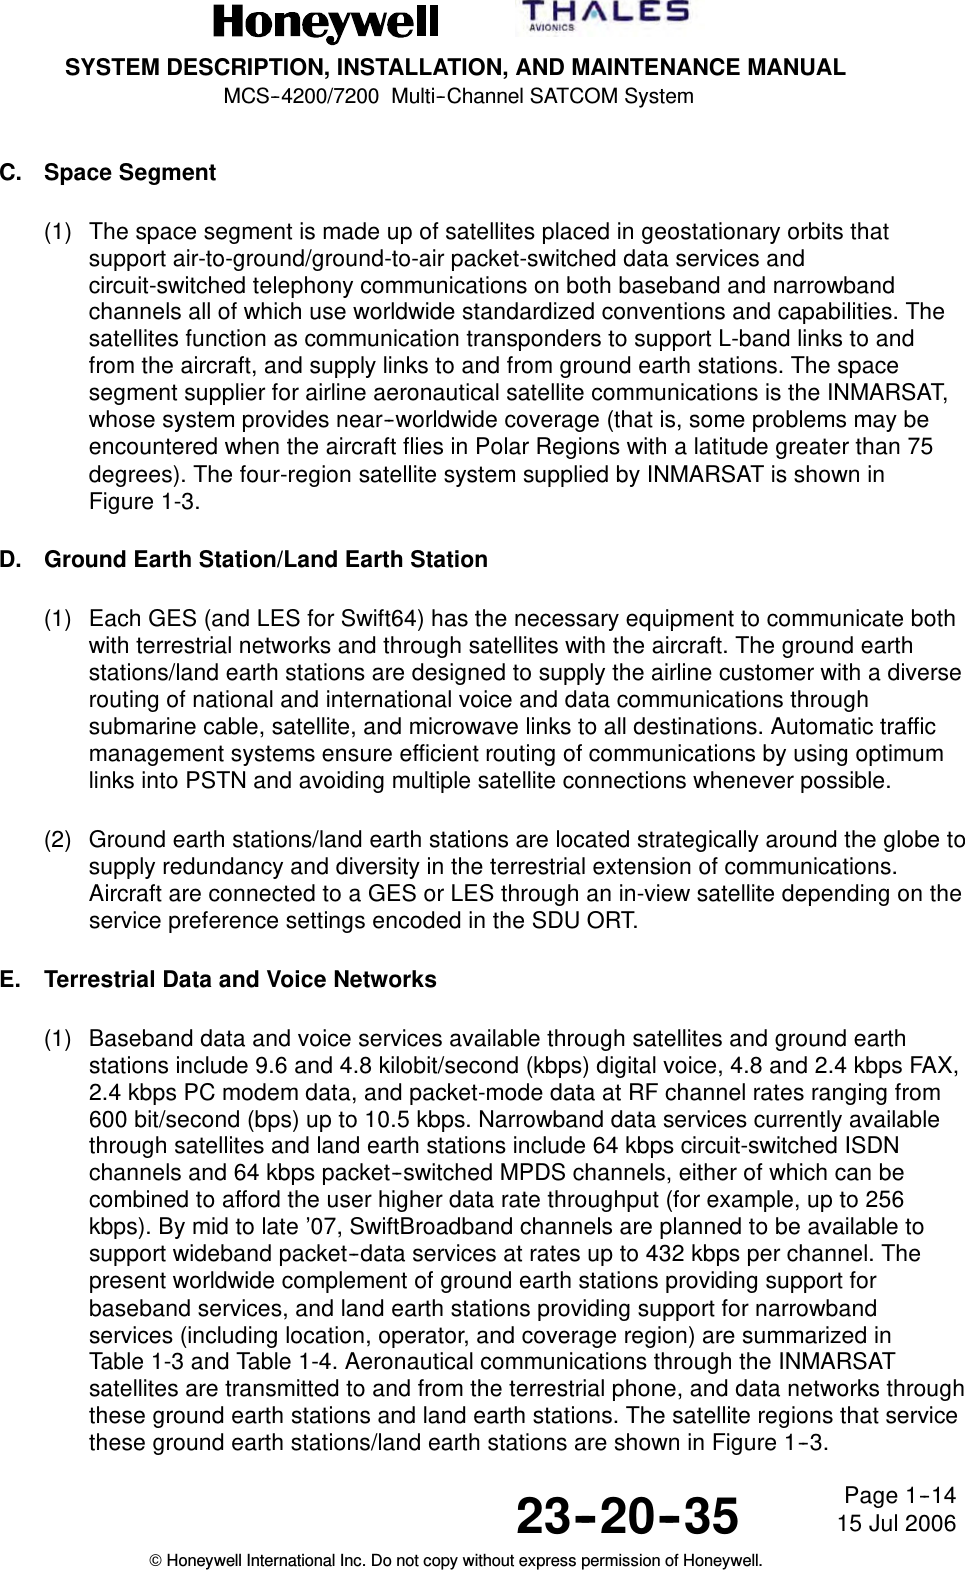 SYSTEM DESCRIPTION, INSTALLATION, AND MAINTENANCE MANUALMCS--4200/7200 Multi--Channel SATCOM System23--20--35 15 Jul 2006Honeywell International Inc. Do not copy without express permission of Honeywell.Page 1--14C. Space Segment(1) The space segment is made up of satellites placed in geostationary orbits thatsupport air-to-ground/ground-to-air packet-switched data services andcircuit-switched telephony communications on both baseband and narrowbandchannels all of which use worldwide standardized conventions and capabilities. Thesatellites function as communication transponders to support L-band links to andfrom the aircraft, and supply links to and from ground earth stations. The spacesegment supplier for airline aeronautical satellite communications is the INMARSAT,whose system provides near--worldwide coverage (that is, some problems may beencountered when the aircraft flies in Polar Regions with a latitude greater than 75degrees). The four-region satellite system supplied by INMARSAT is shown inFigure 1-3.D. Ground Earth Station/Land Earth Station(1) Each GES (and LES for Swift64) has the necessary equipment to communicate bothwith terrestrial networks and through satellites with the aircraft. The ground earthstations/land earth stations are designed to supply the airline customer with a diverserouting of national and international voice and data communications throughsubmarine cable, satellite, and microwave links to all destinations. Automatic trafficmanagement systems ensure efficient routing of communications by using optimumlinks into PSTN and avoiding multiple satellite connections whenever possible.(2) Ground earth stations/land earth stations are located strategically around the globe tosupply redundancy and diversity in the terrestrial extension of communications.Aircraft are connected to a GES or LES through an in-view satellite depending on theservice preference settings encoded in the SDU ORT.E. Terrestrial Data and Voice Networks(1) Baseband data and voice services available through satellites and ground earthstations include 9.6 and 4.8 kilobit/second (kbps) digital voice, 4.8 and 2.4 kbps FAX,2.4 kbps PC modem data, and packet-mode data at RF channel rates ranging from600 bit/second (bps) up to 10.5 kbps. Narrowband data services currently availablethrough satellites and land earth stations include 64 kbps circuit-switched ISDNchannels and 64 kbps packet--switched MPDS channels, either of which can becombined to afford the user higher data rate throughput (for example, up to 256kbps). By mid to late ’07, SwiftBroadband channels are planned to be available tosupport wideband packet--data services at rates up to 432 kbps per channel. Thepresent worldwide complement of ground earth stations providing support forbaseband services, and land earth stations providing support for narrowbandservices (including location, operator, and coverage region) are summarized inTable 1-3 and Table 1-4. Aeronautical communications through the INMARSATsatellites are transmitted to and from the terrestrial phone, and data networks throughthese ground earth stations and land earth stations. The satellite regions that servicethese ground earth stations/land earth stations are shown in Figure 1--3.